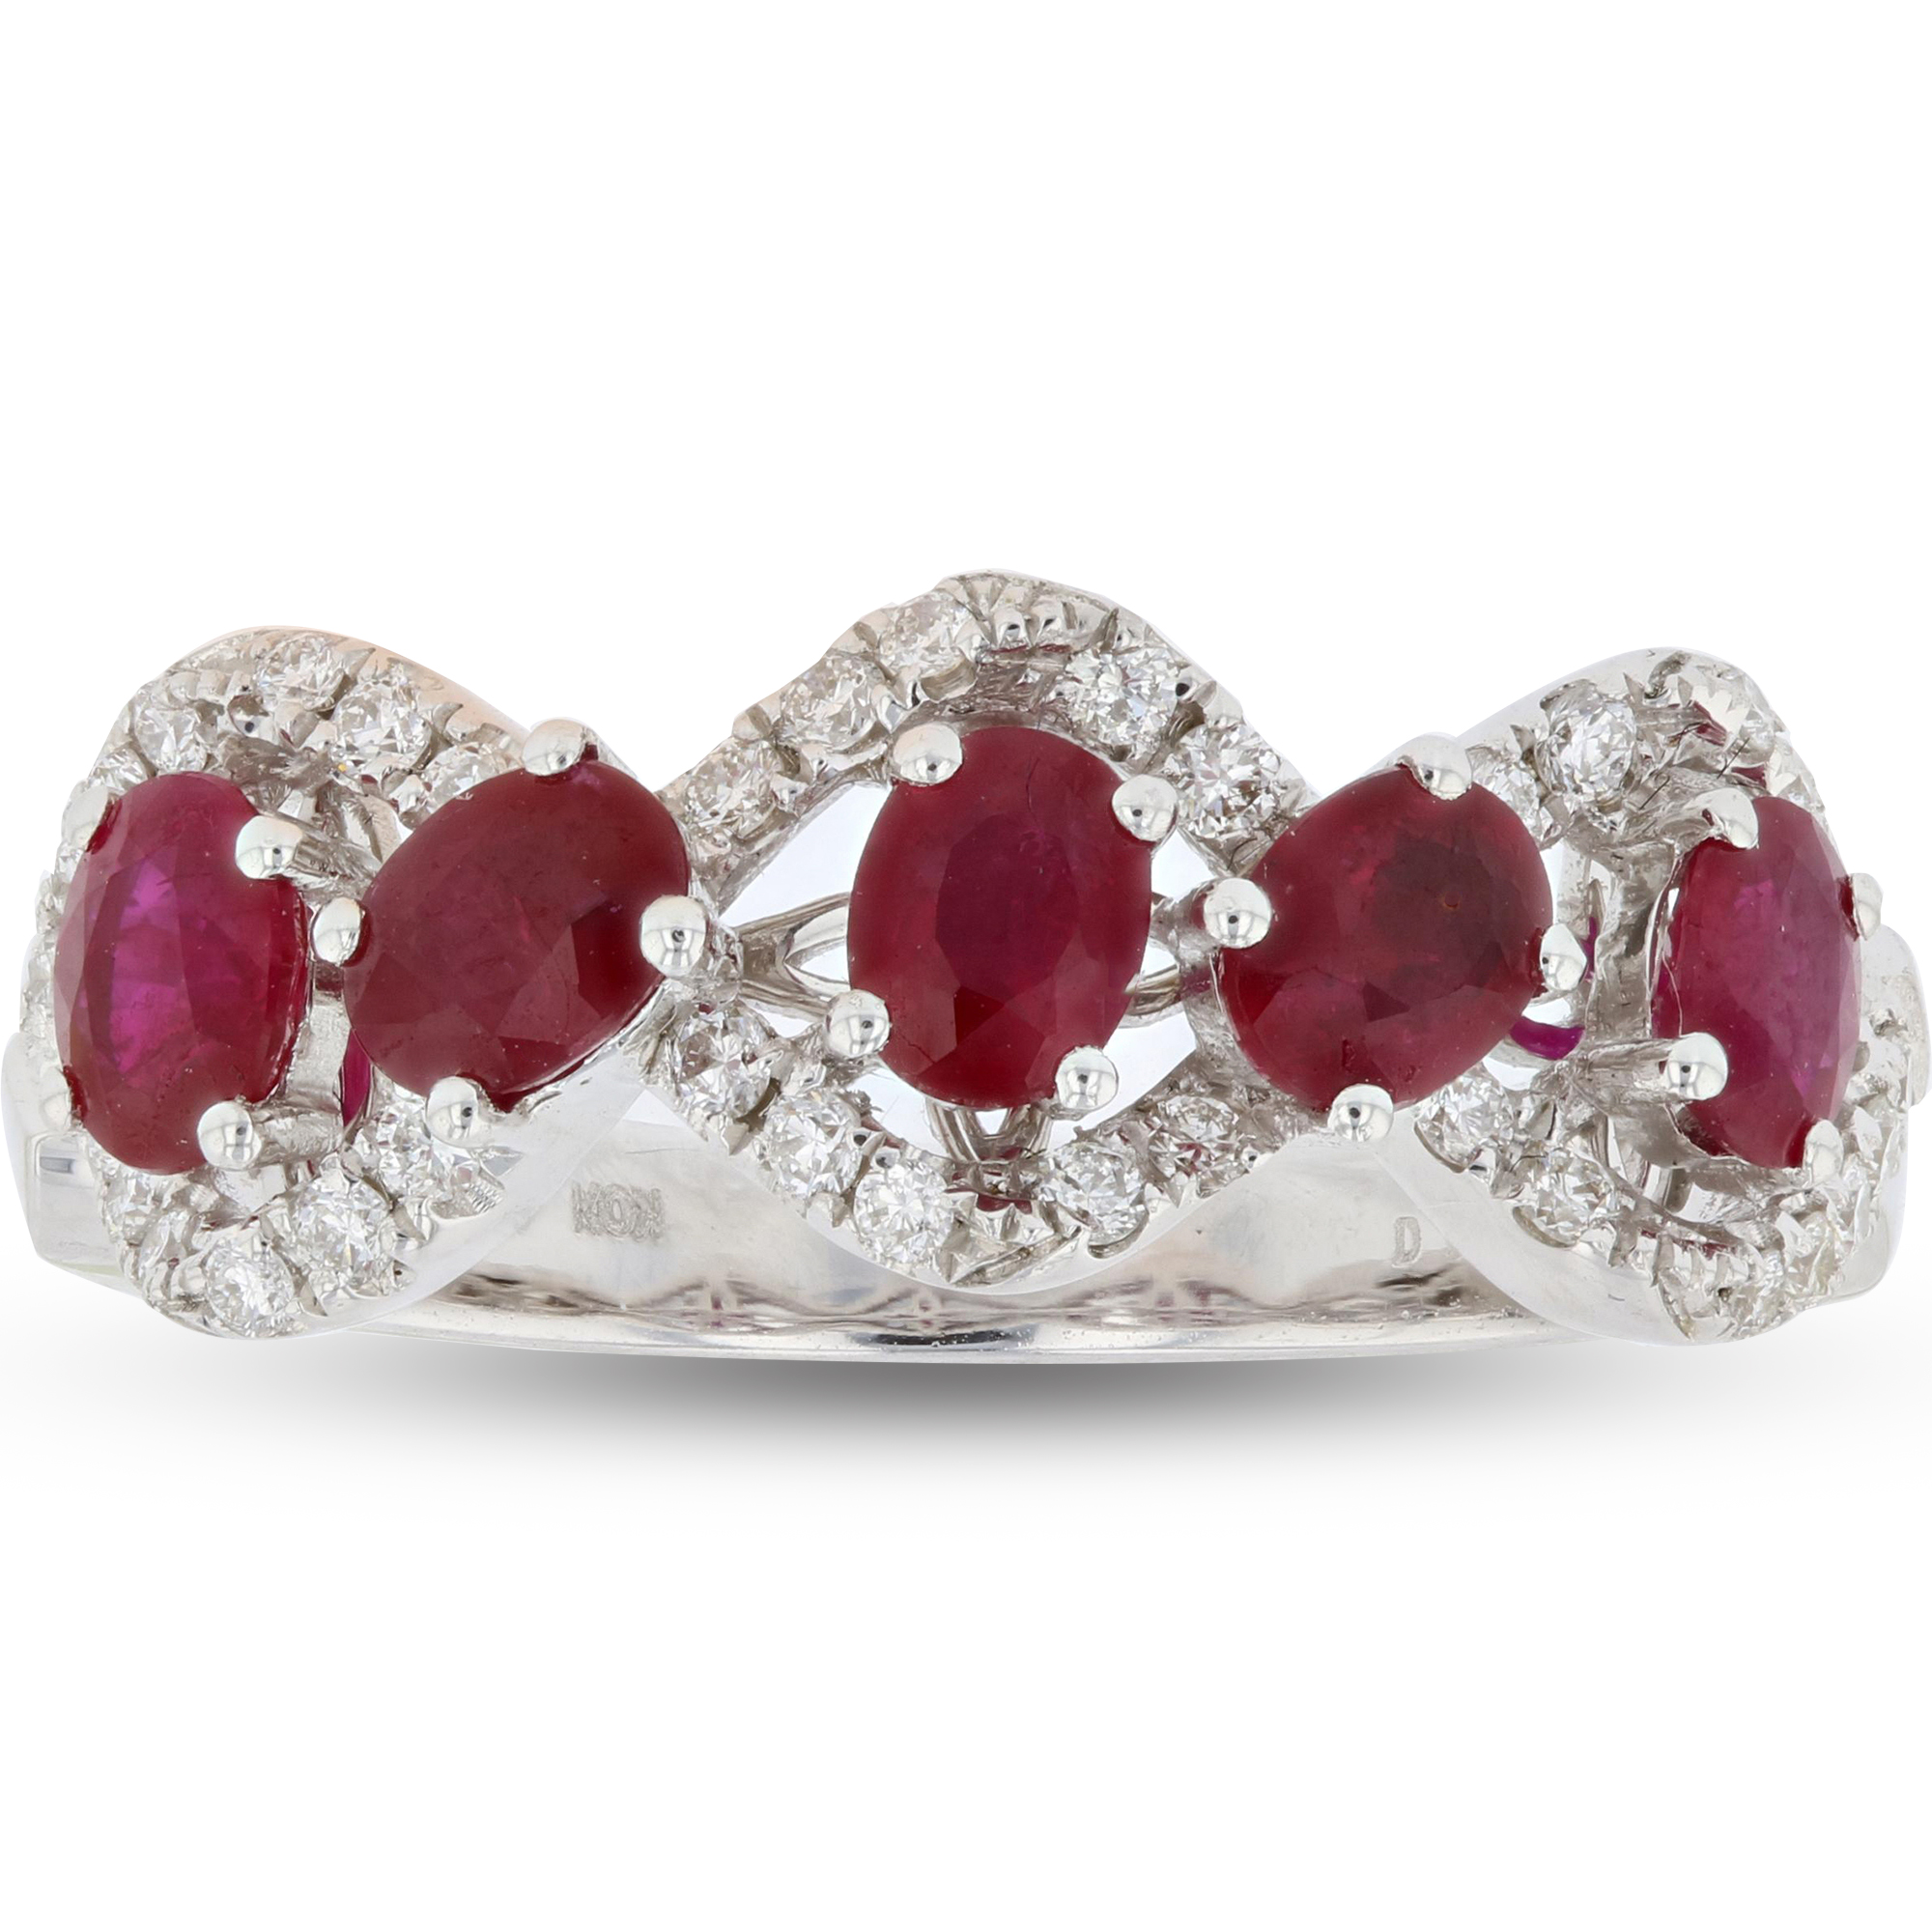 View 1.45ctw Diamond and Ruby Ring in 18k White Gold